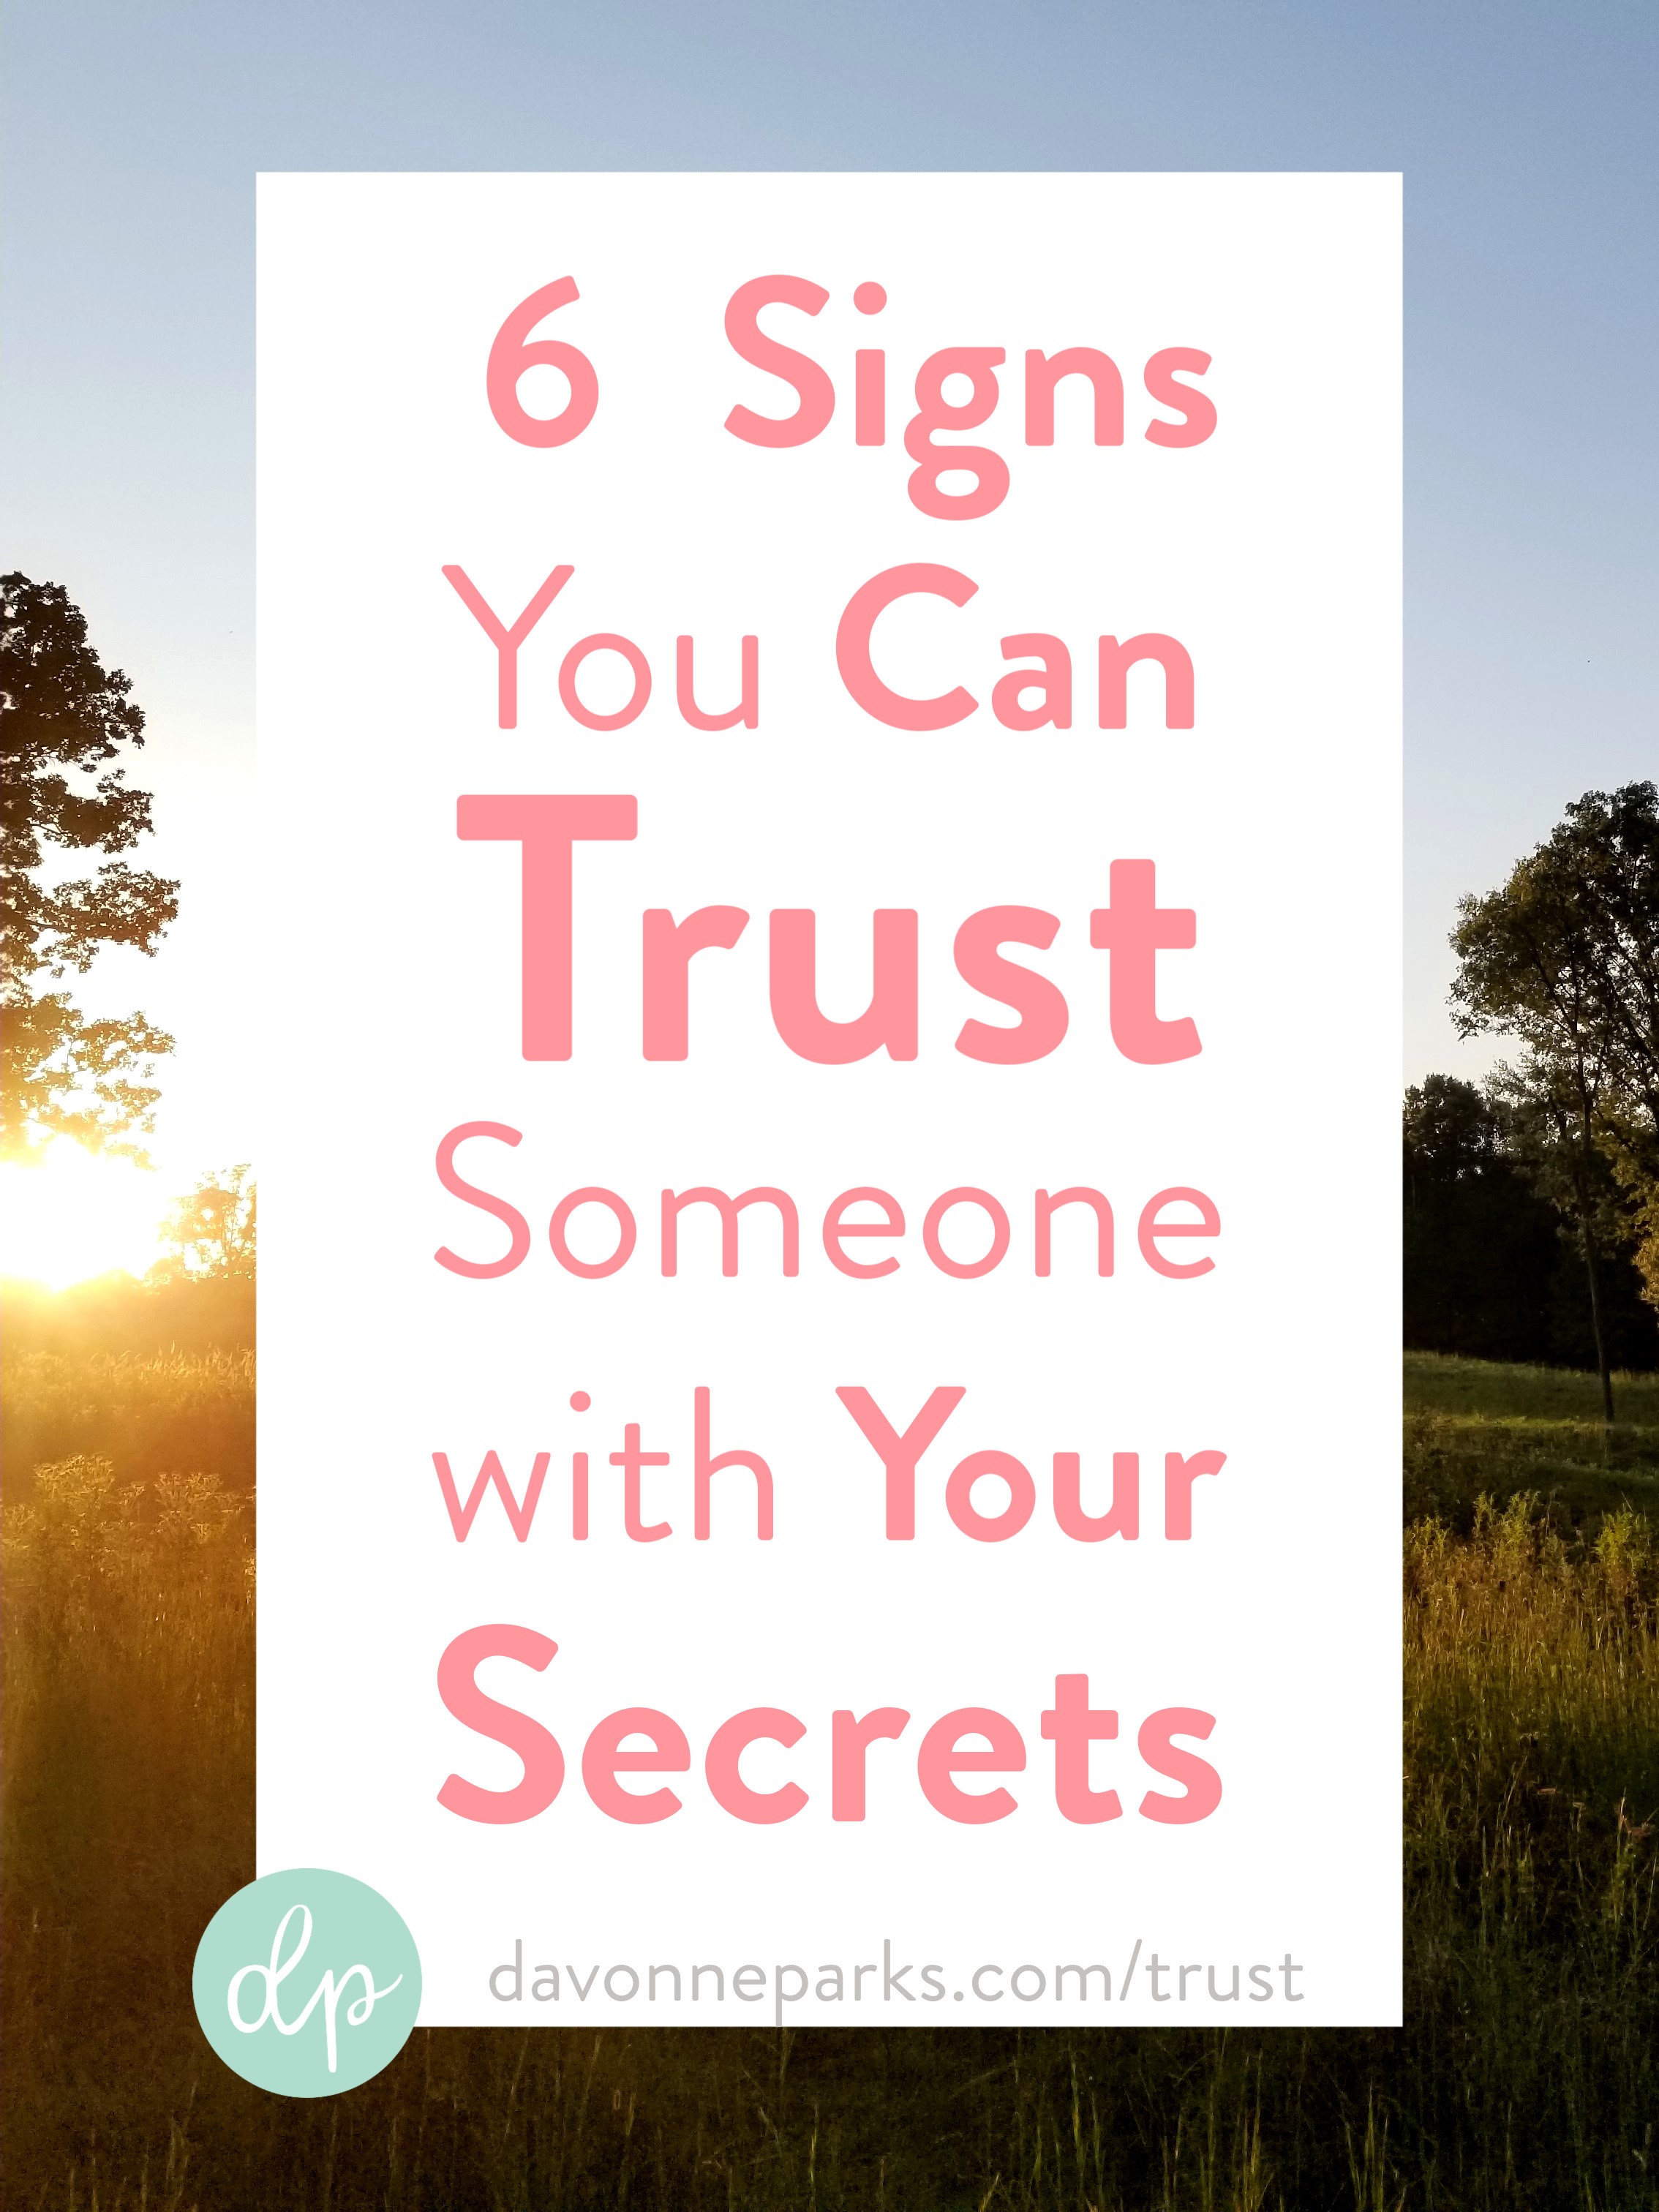 6 Signs You Can Trust Someone With Your Secrets